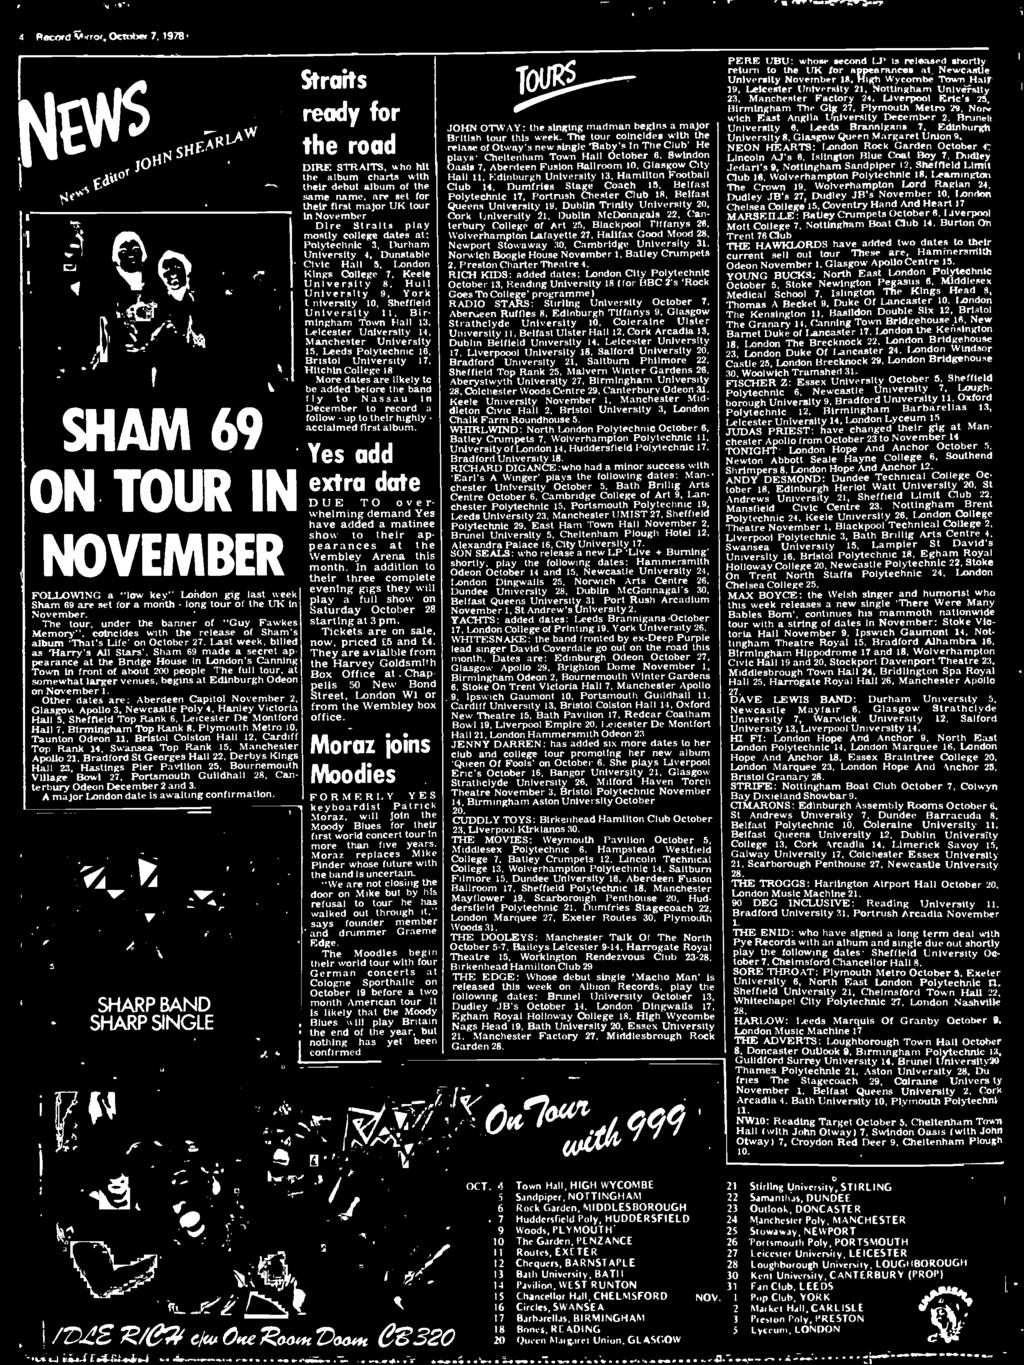 appearances at the Wembley Arena ths month n addton to ther three complete evenng ggs they wll FOLLOWNG a "low key" London gg as week Sham 69 are set 'for a month long tour of the UK n play a full